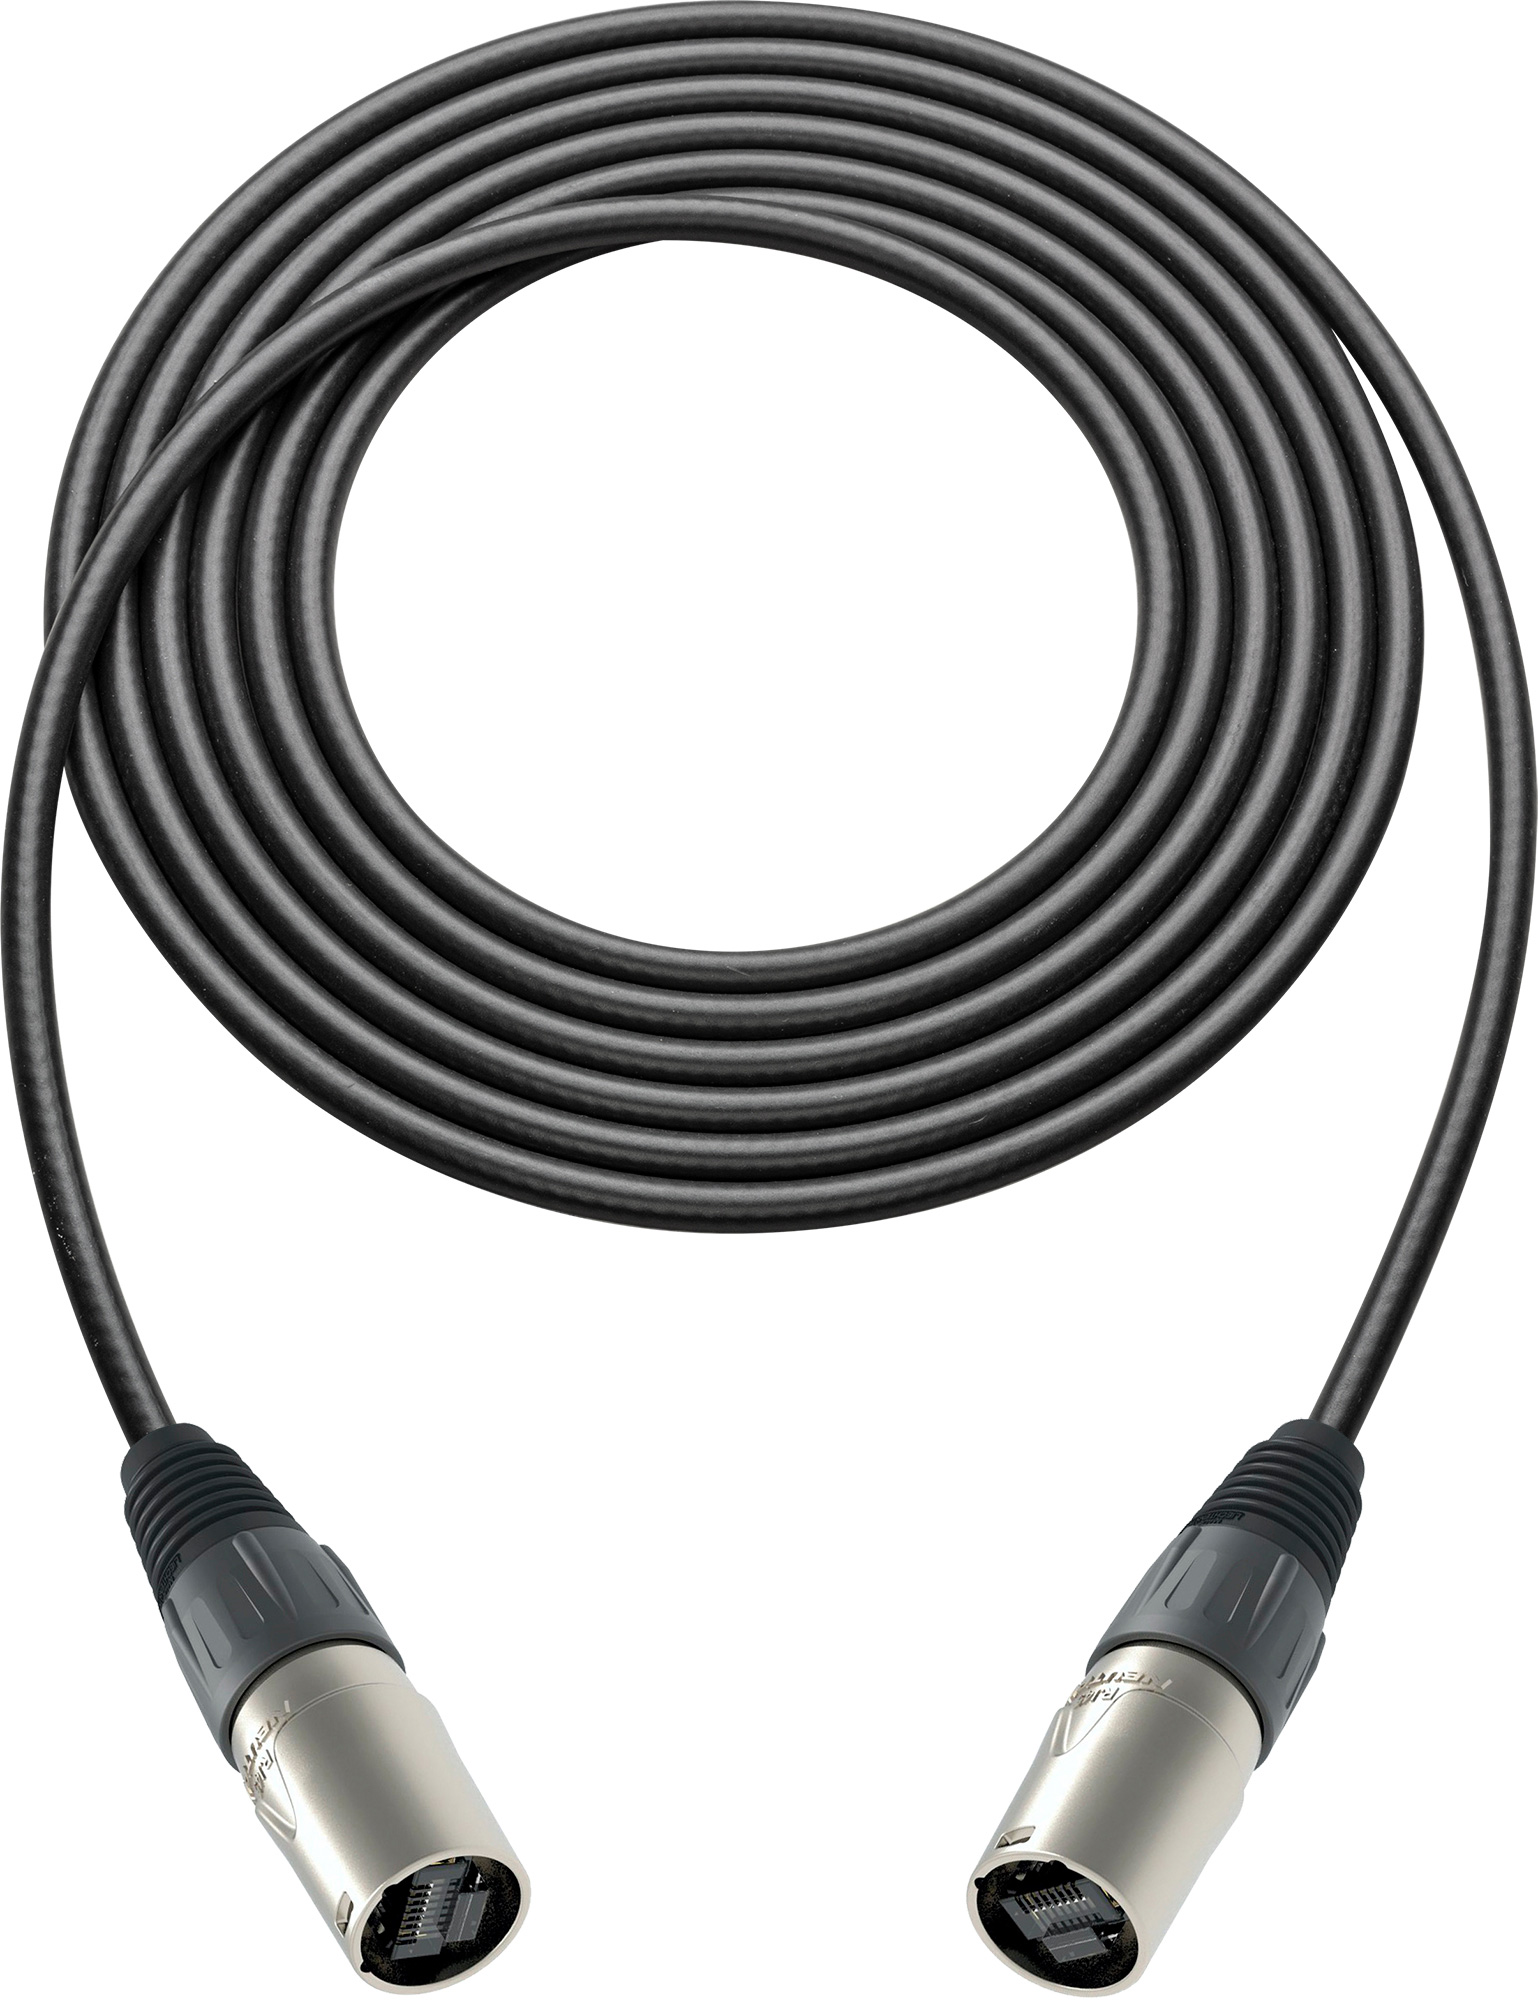 RJ45 EtherCON Cable CAT-5e with DataTuff Cable - 10 Ft